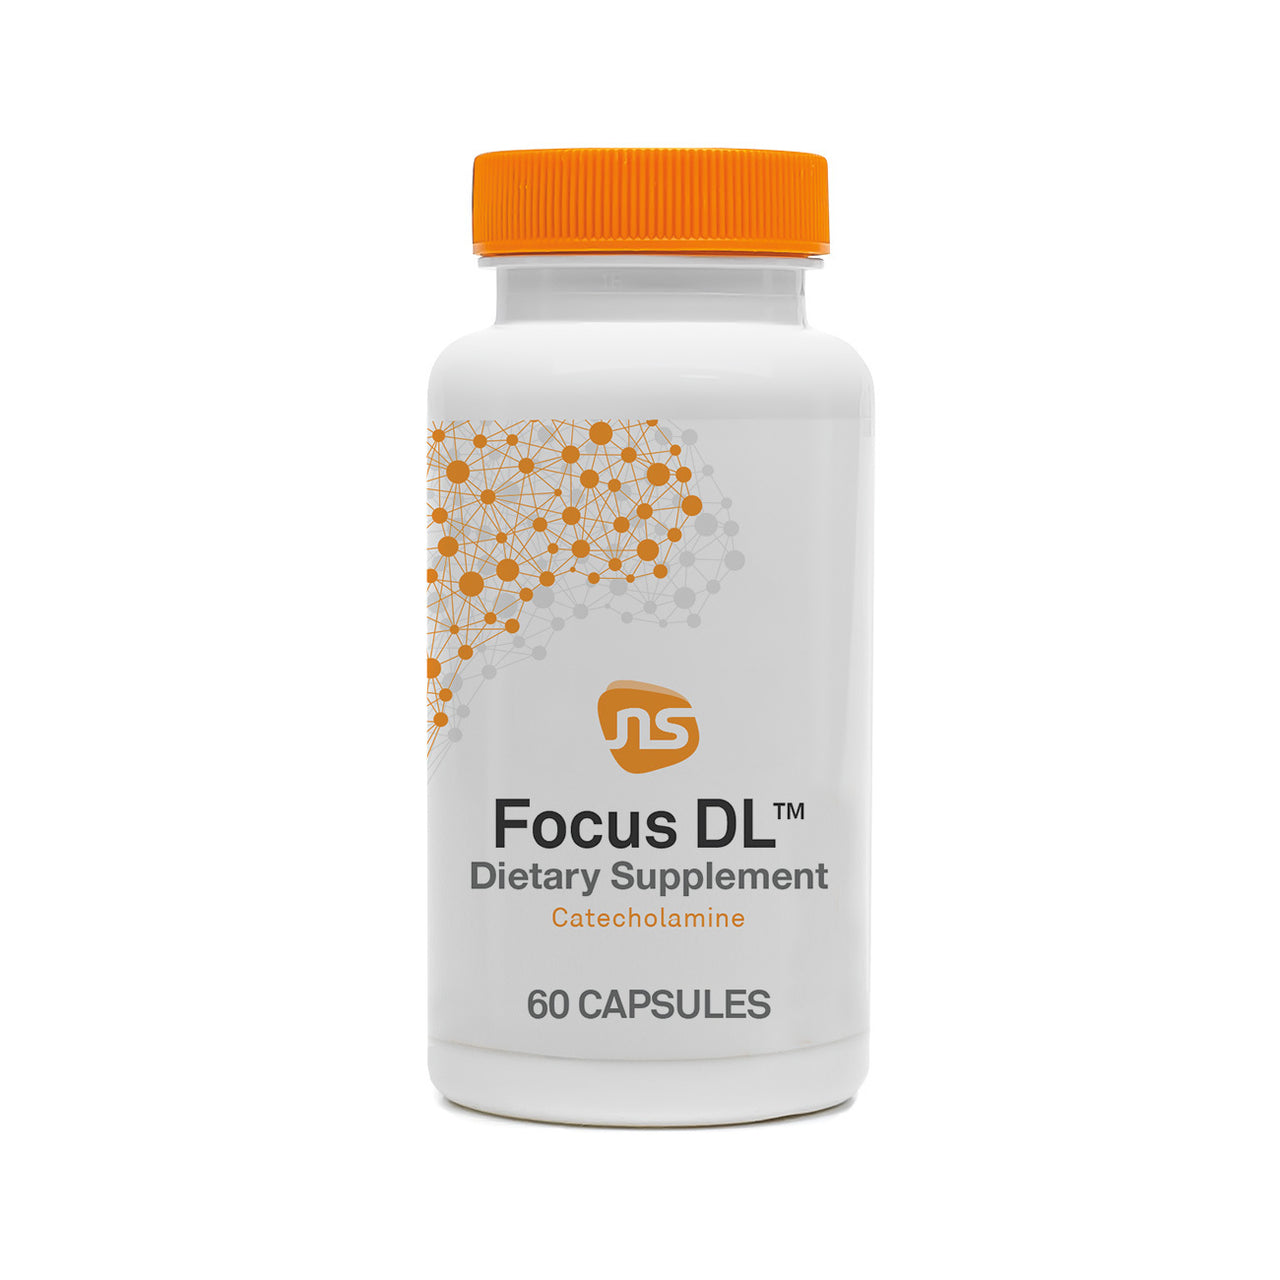 Focus DL - Neuroscience Inc - Contains PEA to improve attention, impulse, control and memory